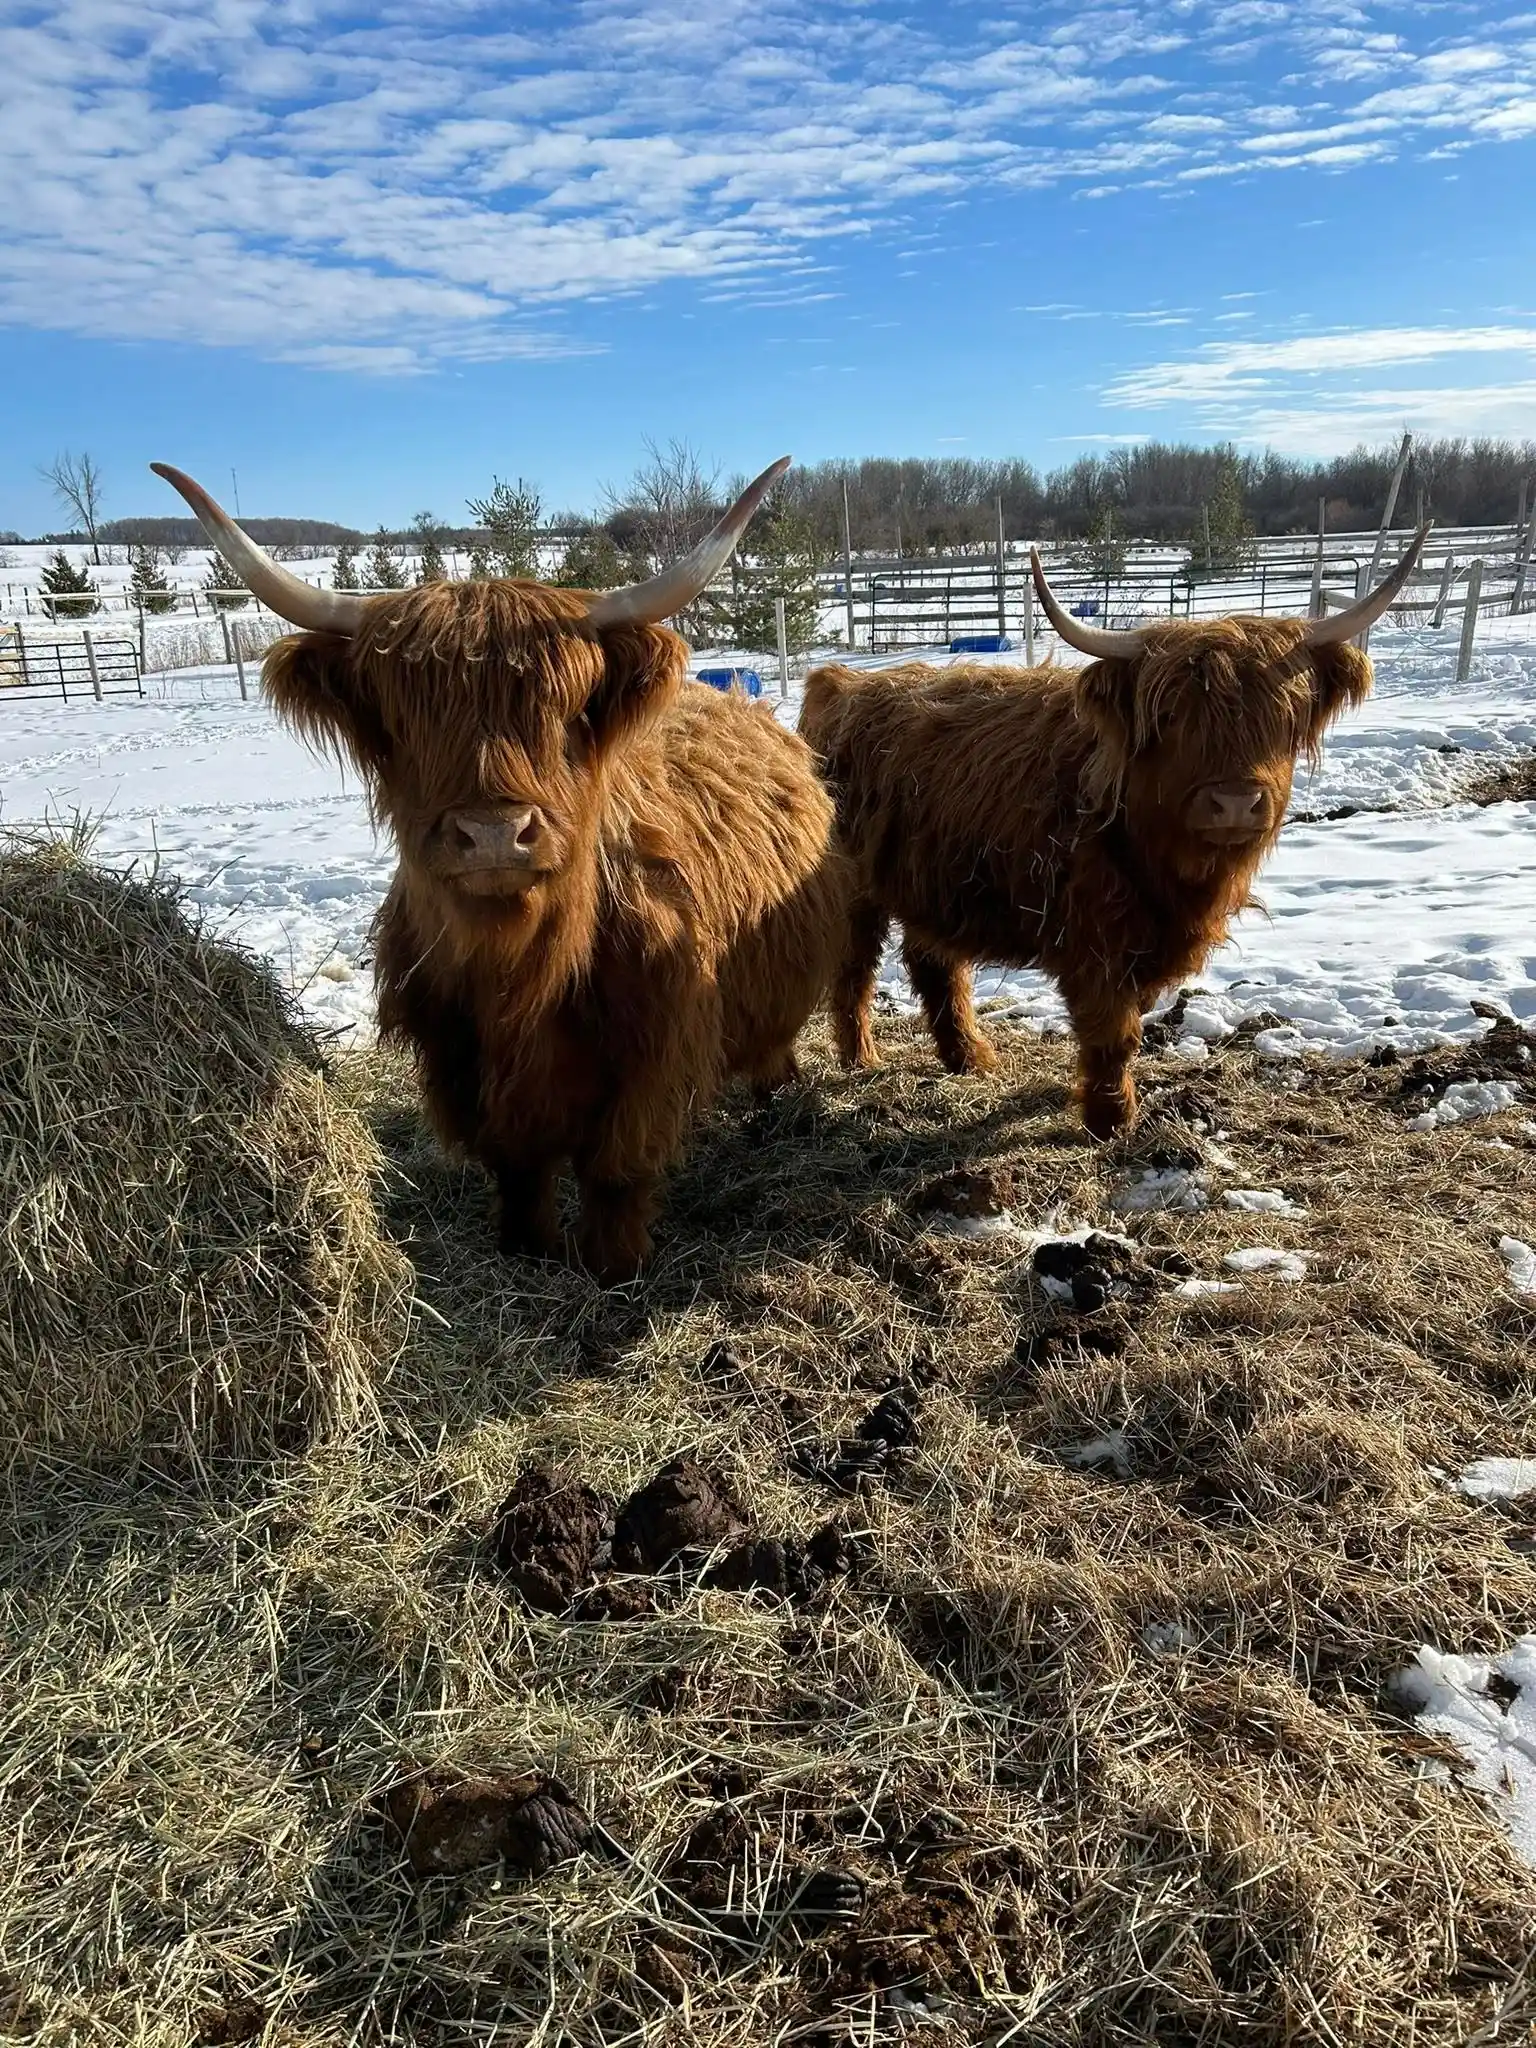 Our two Highland cows